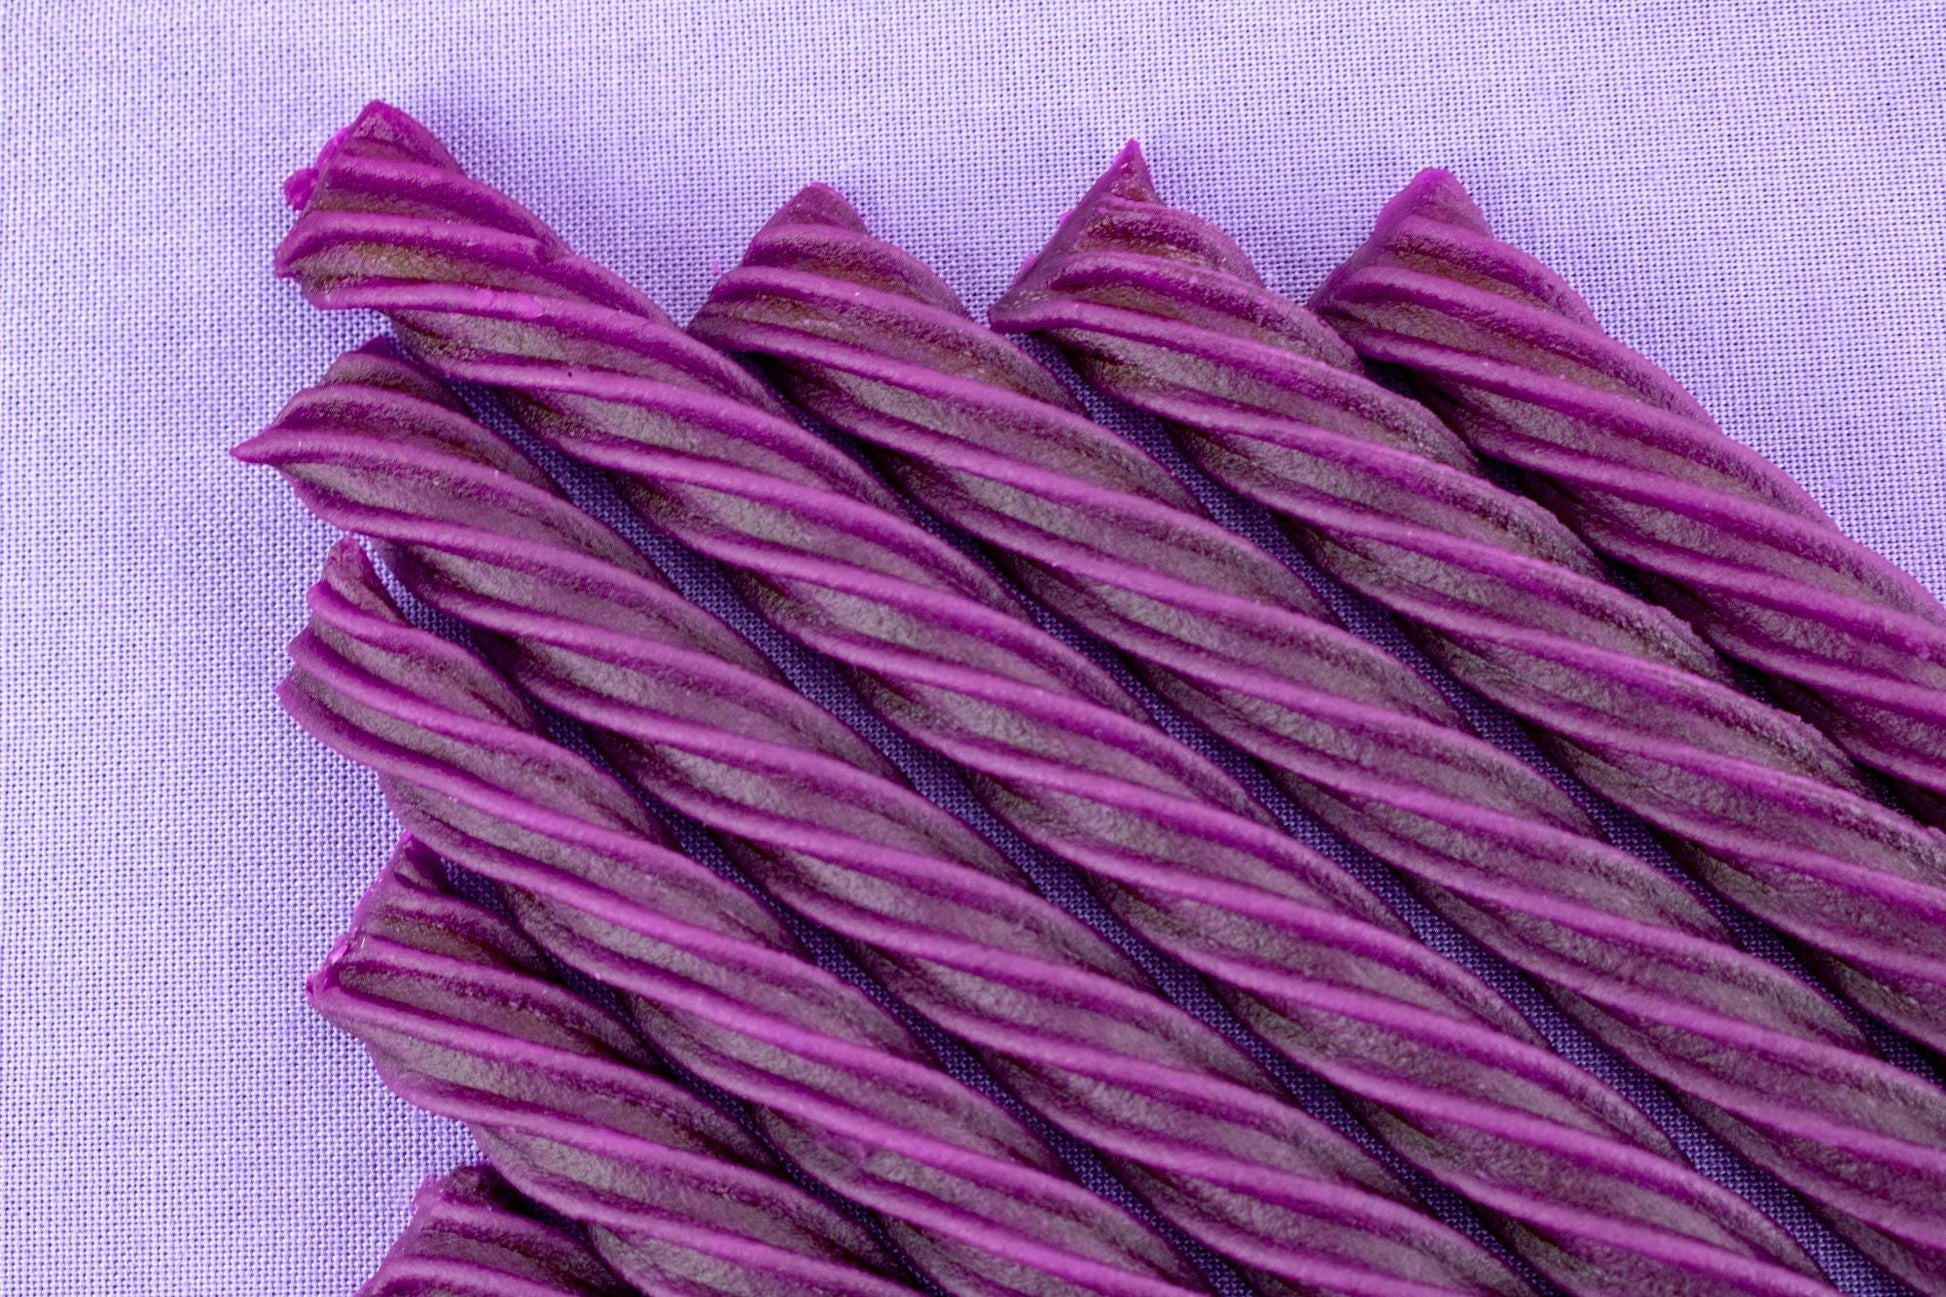 Chewy Grape Purple Licorice Twists with a light purple background